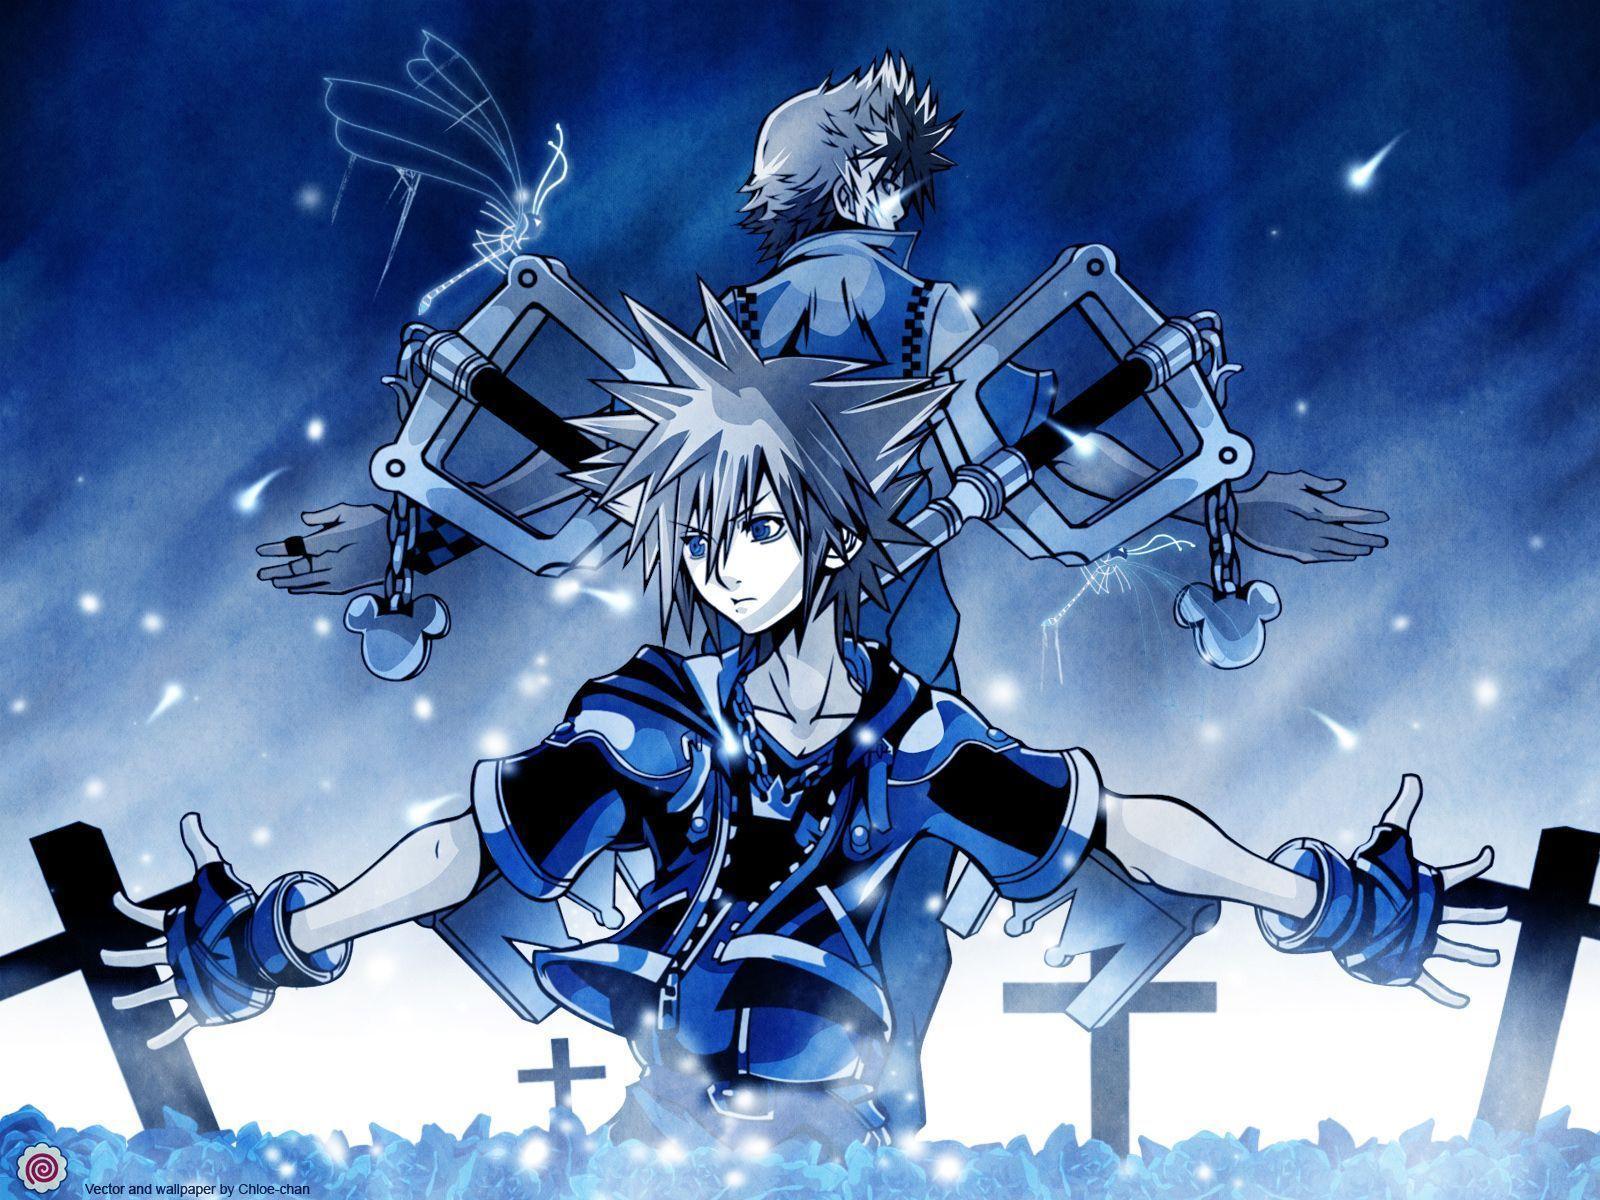 Kingdom Hearts and Scan Gallery